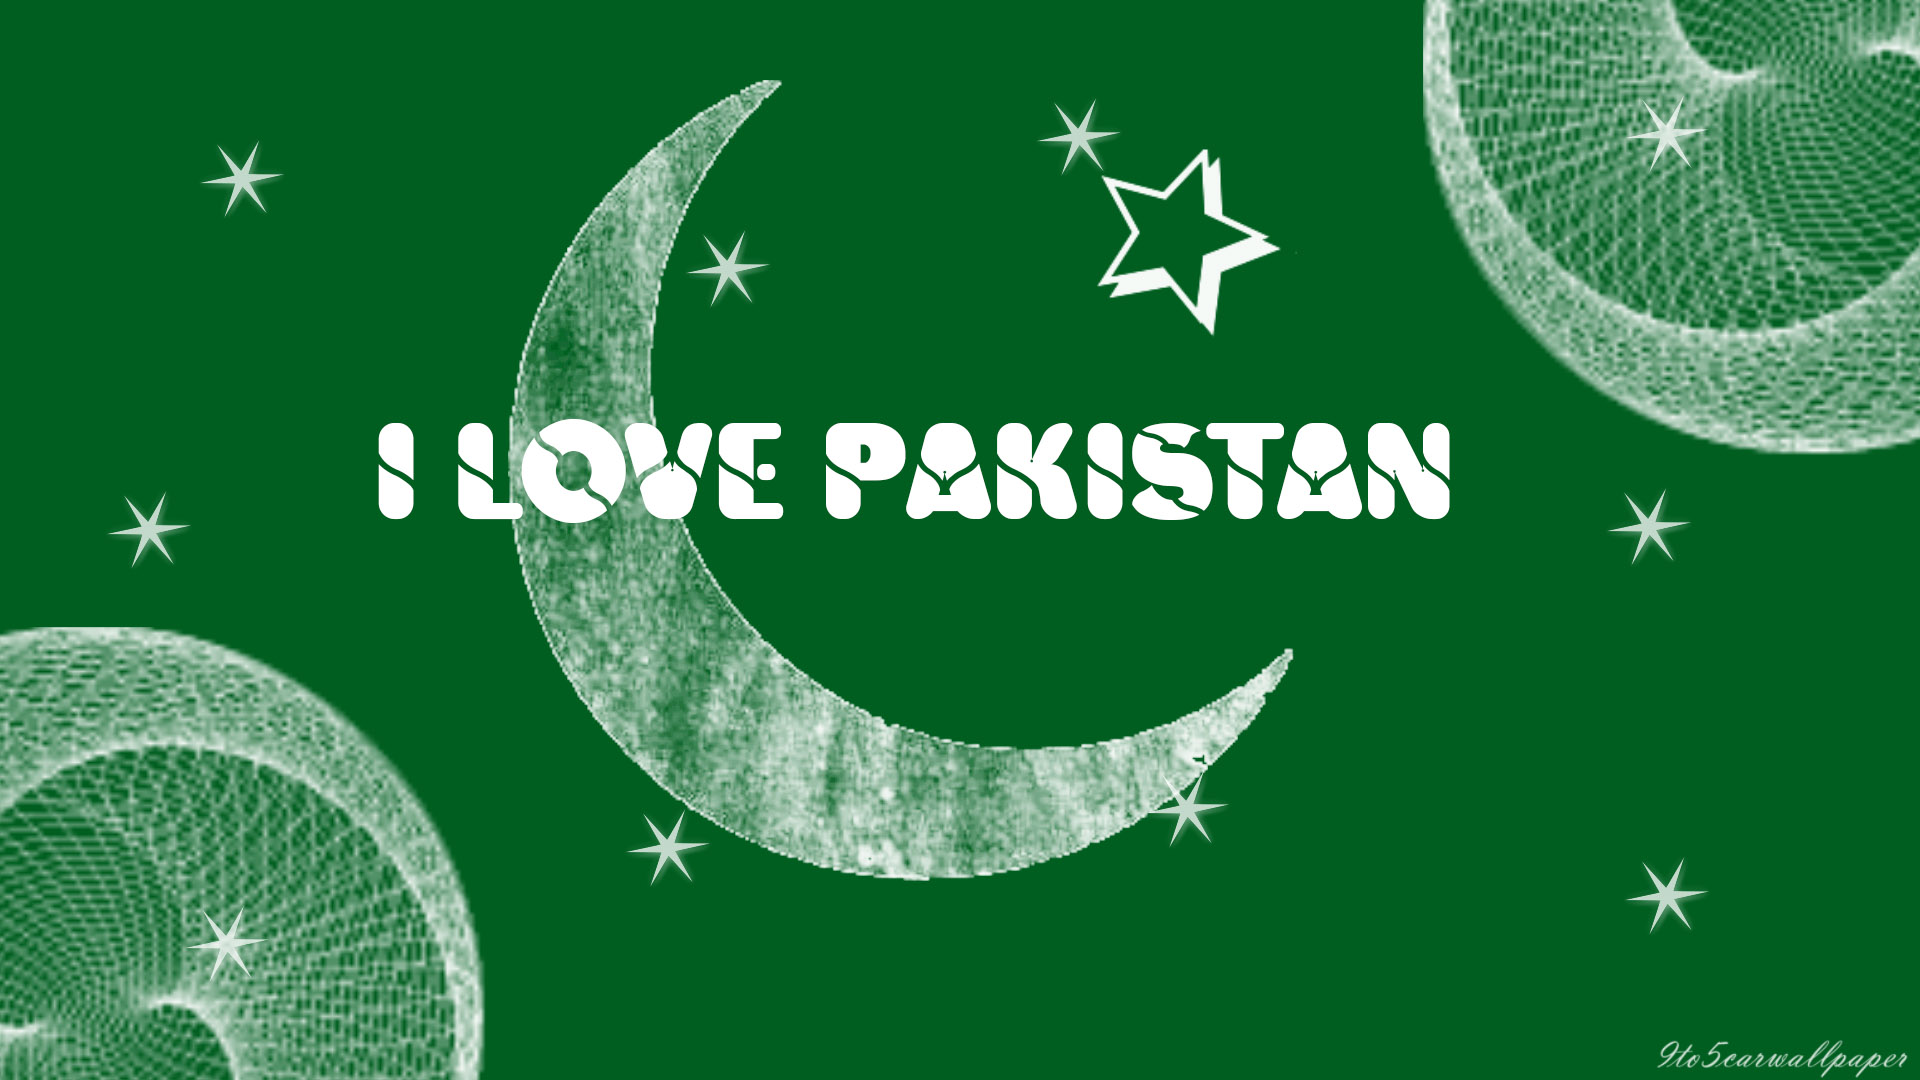 i-love-Pakistan-hd-wallpapers-posters-2019